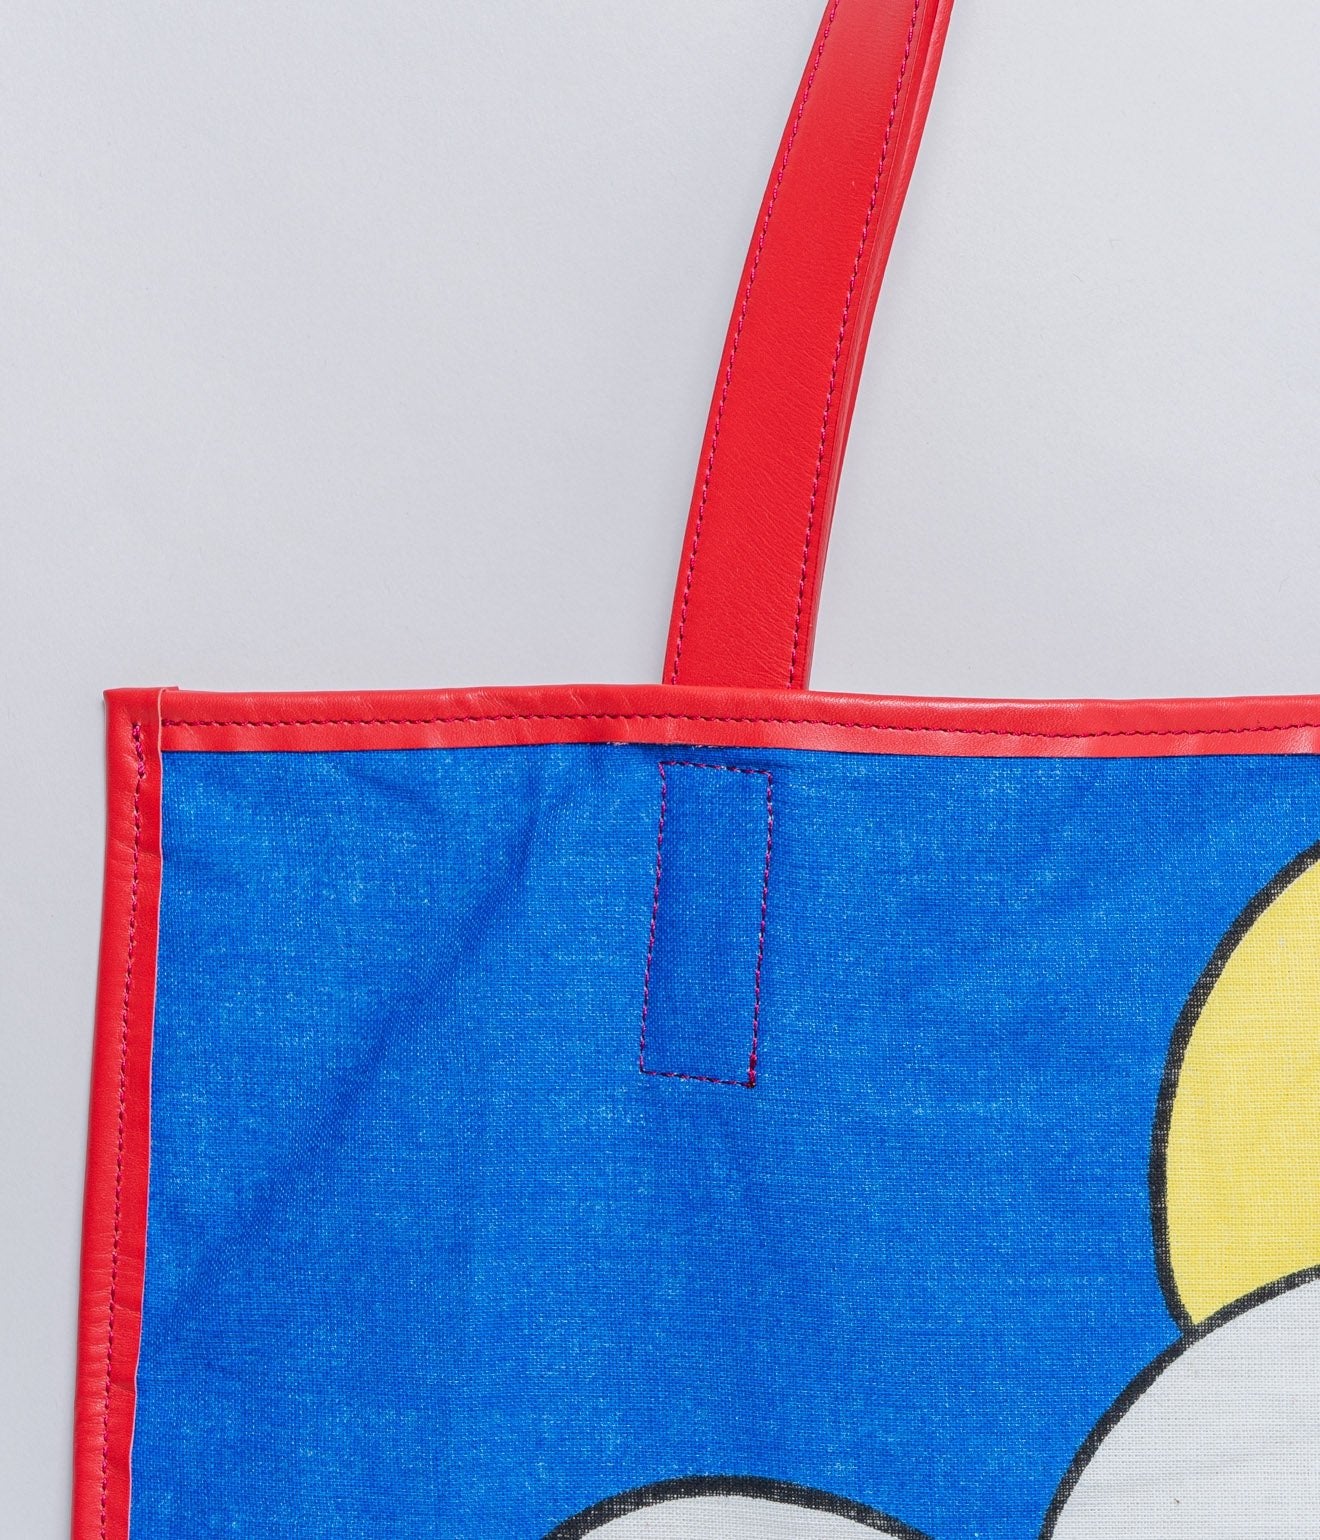 WEAREALLANIMALS UPCYCLE ”Piping Flat Tote -Vintage Smurf Fabric-" #5 - WEAREALLANIMALS